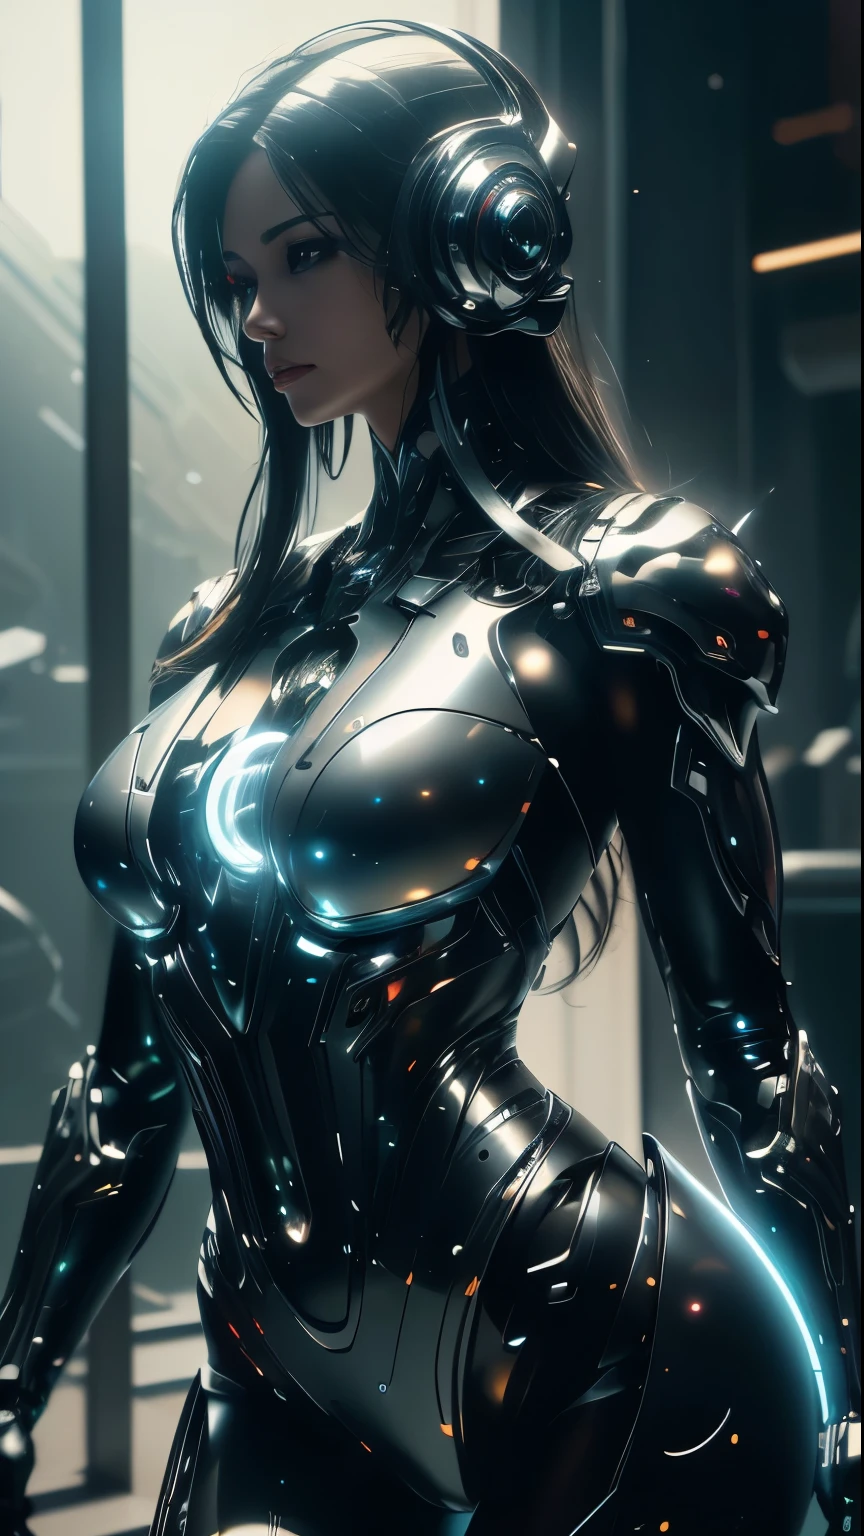 ((best quality)), ((masterpiece)), (detailed: 1.4), ....3D, A photo of a beautiful woman in thick neon and protective armor with generative helmet ai cyberpunk voluminous hair, light particles, pure energy, chaos, anti-tech, hdr (High Dynamic Range), Ray Tracing, NVIDIA RTX, Super Resolution, Unreal 5, Subsurface Dispersion, Textured PBR, Post Processing, Anisotropic Filtering, Depth of Field, Maximum Clarity and Sharpness, Multi-Layer Textures , Albedo and specular maps, surface shading, Accurate simulation of the interaction between light and material, perfect proportions, octane rendering, two-tone lighting, wide aperture, low ISO, white balance, Rule of Thirds, RAW 8K with a gun in his hands